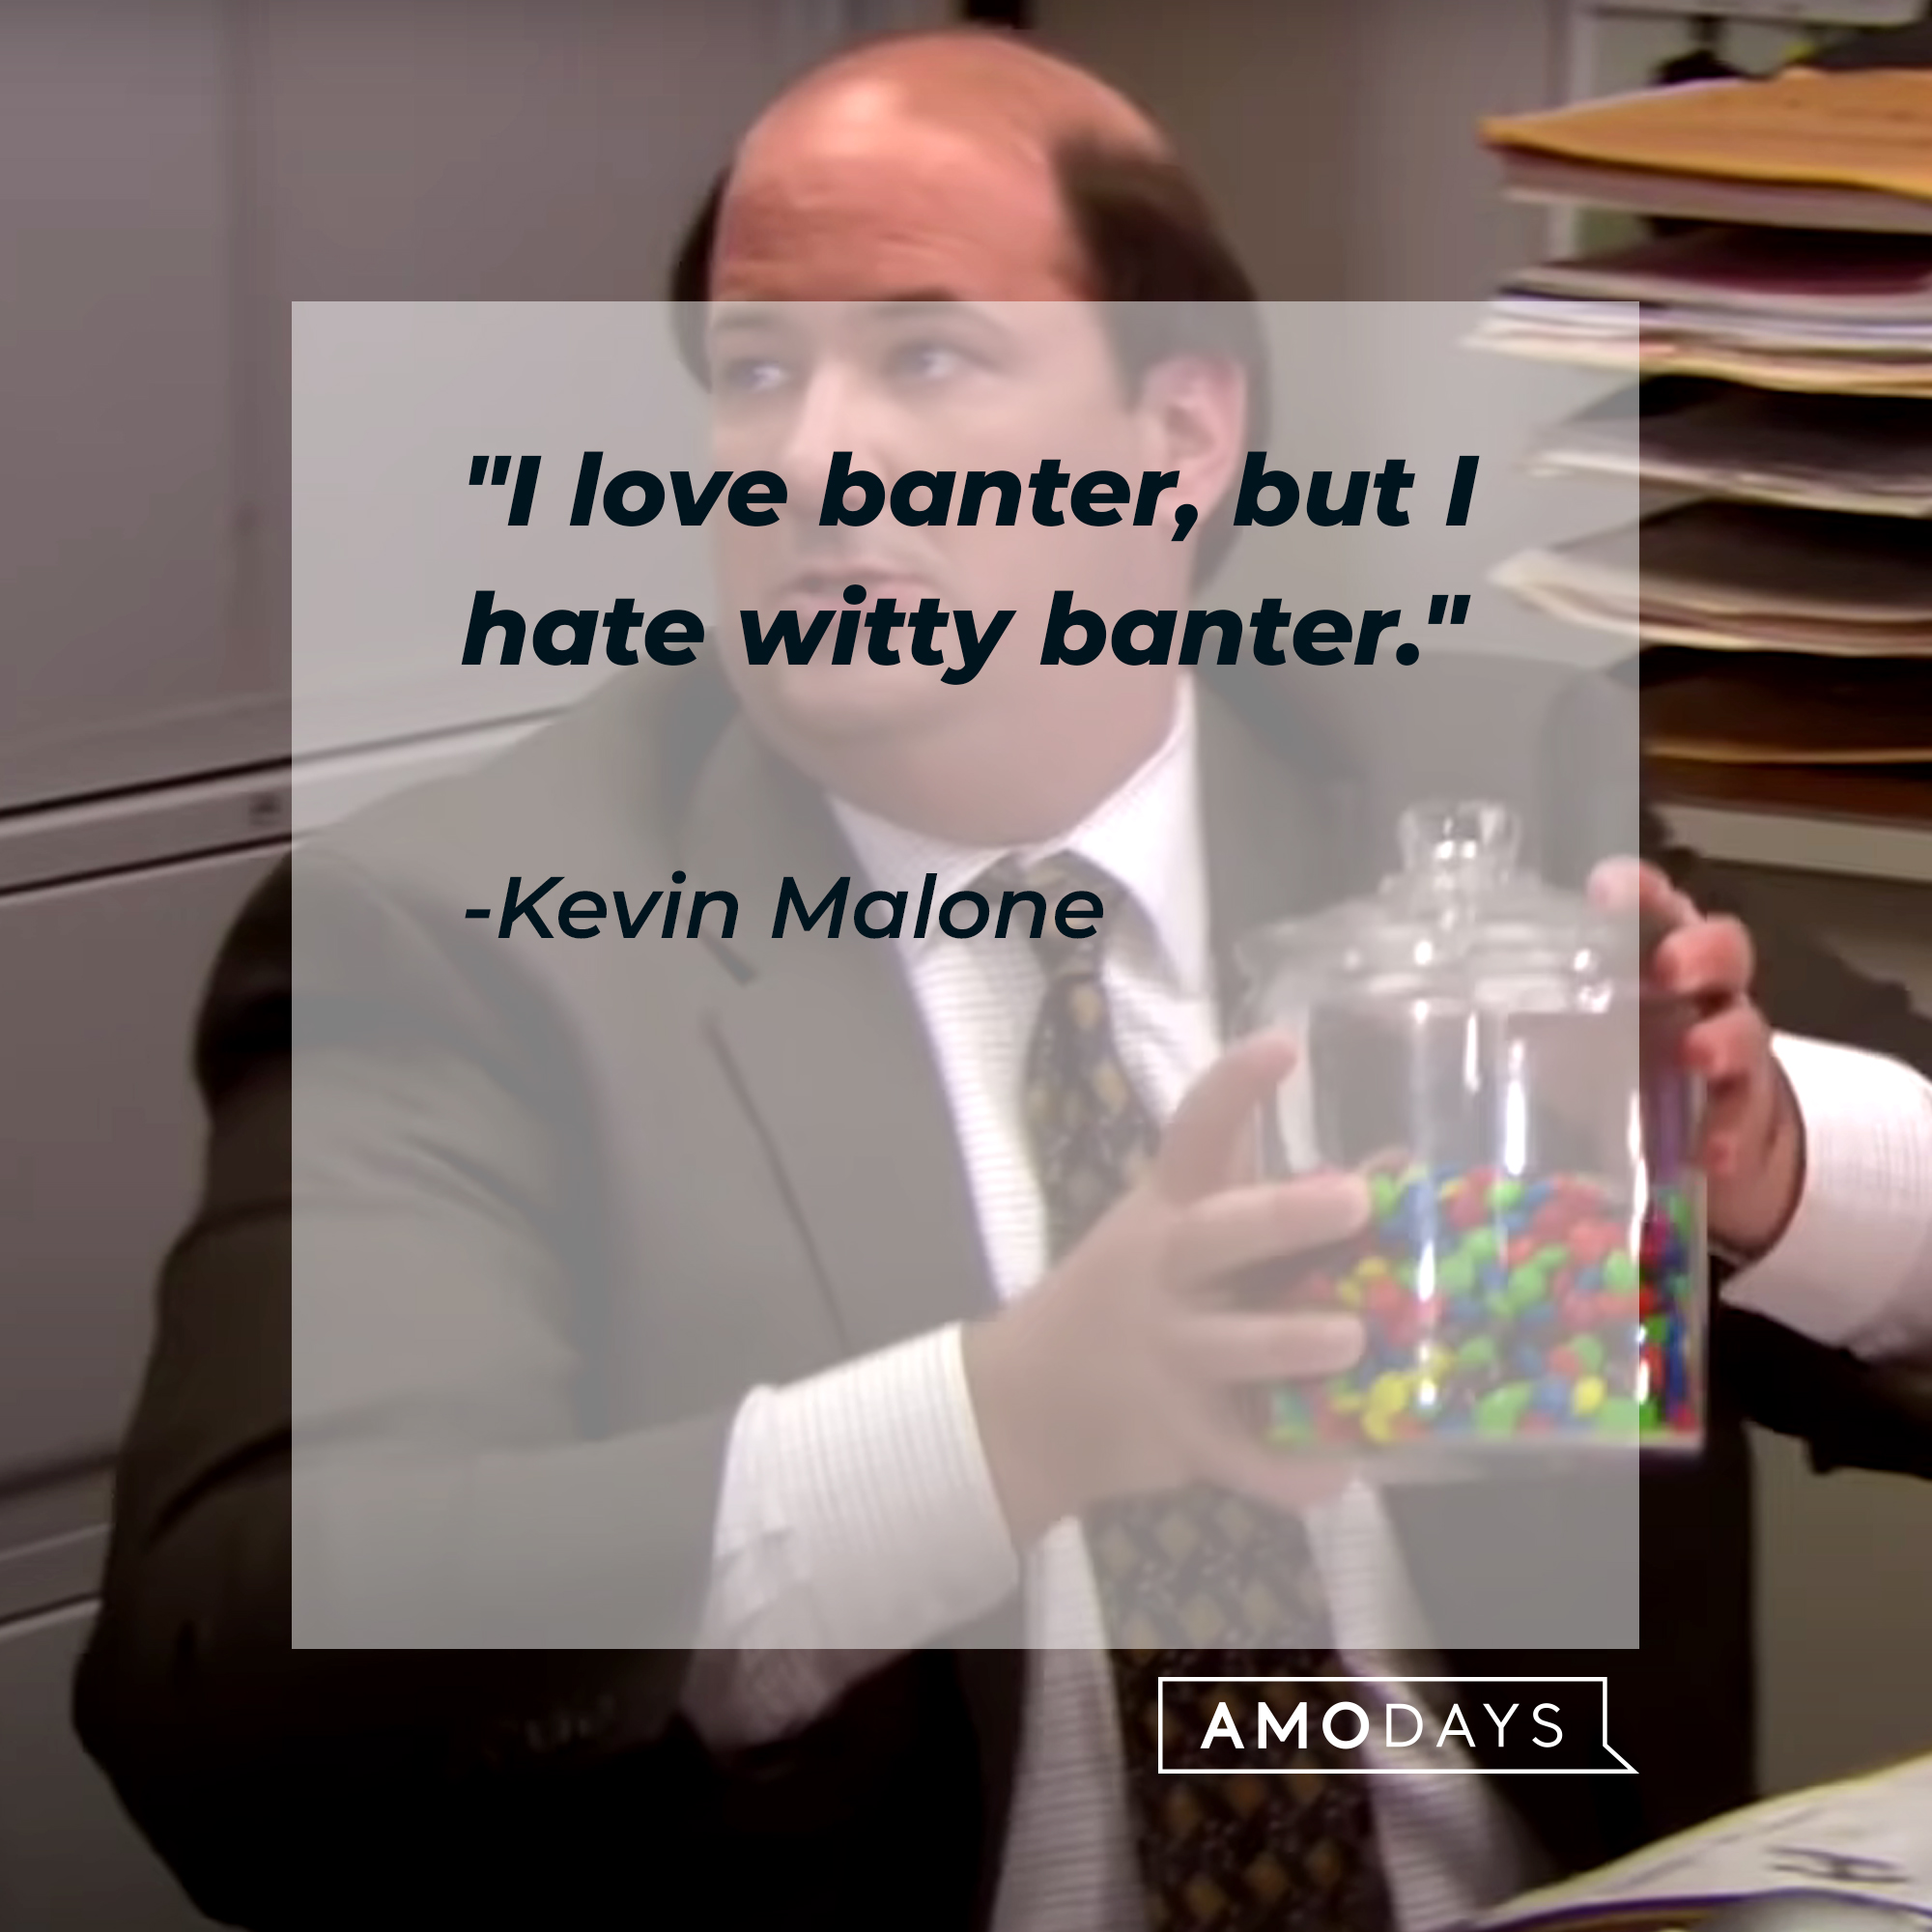 Kevin Malone's quote: "I love banter, but I hate witty banter." | Source: youtube.com/TheOffice